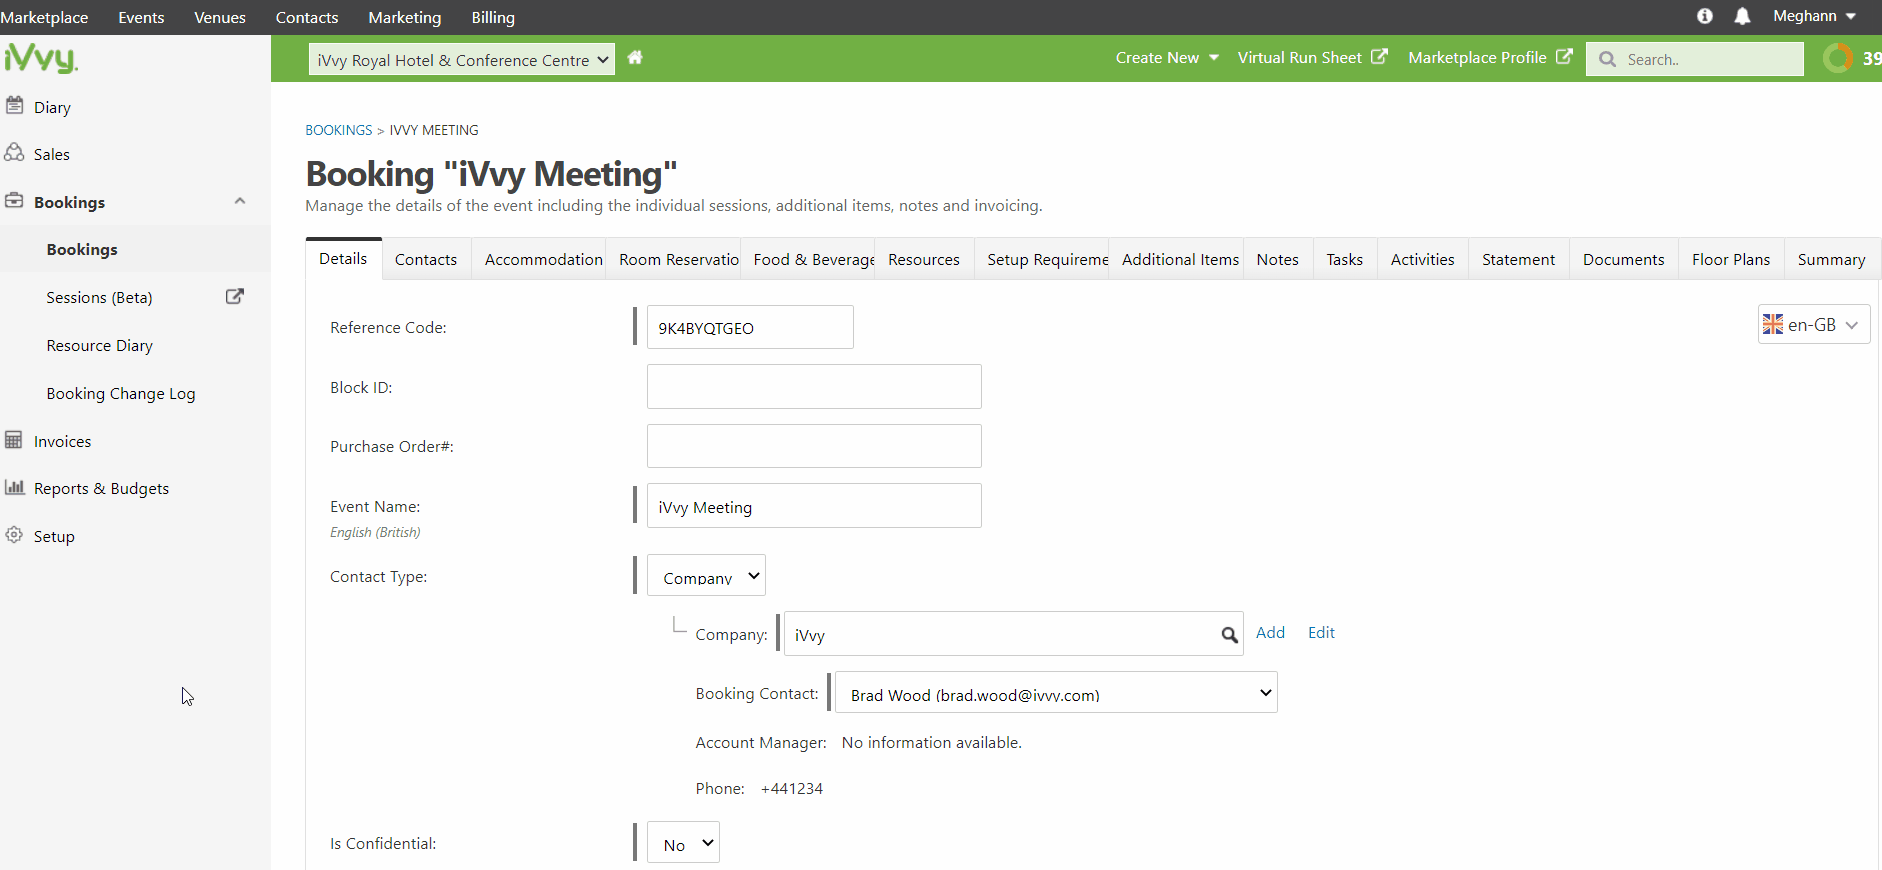 Adding an existing set up requirement to a simple booking